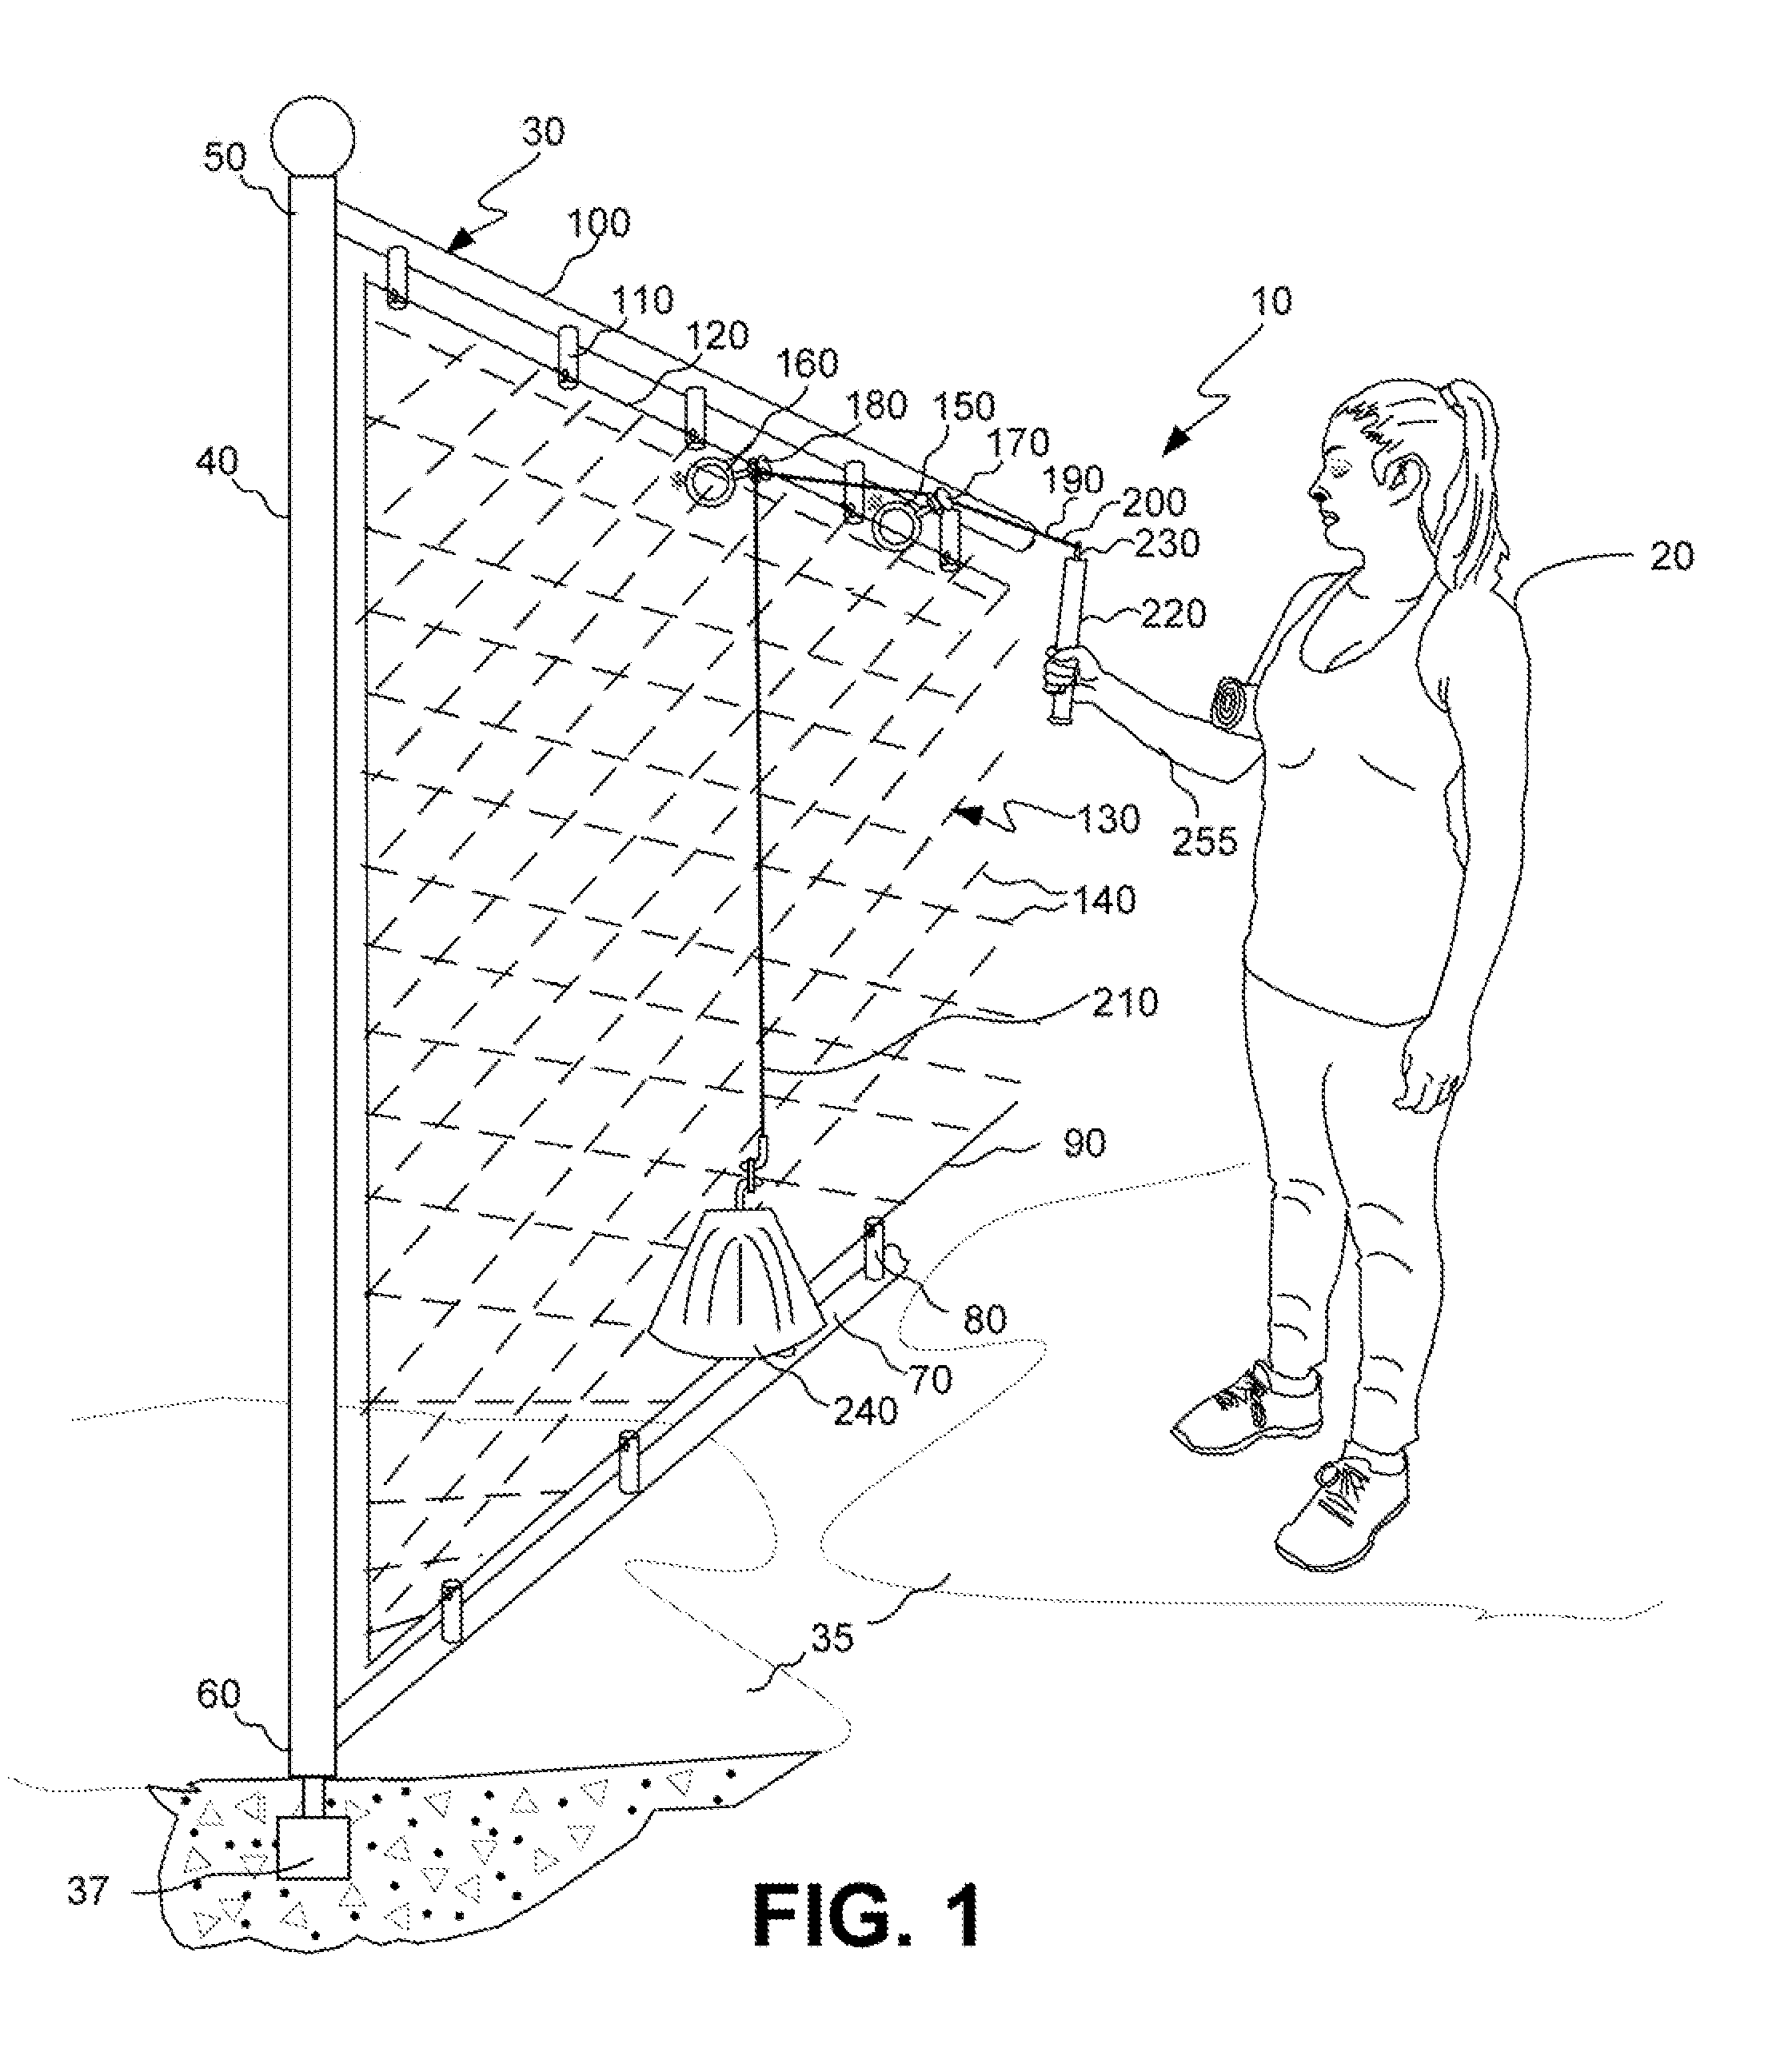 In-field kits and systems for self-directed theraputic pulley-based muscle rehabiliation methods